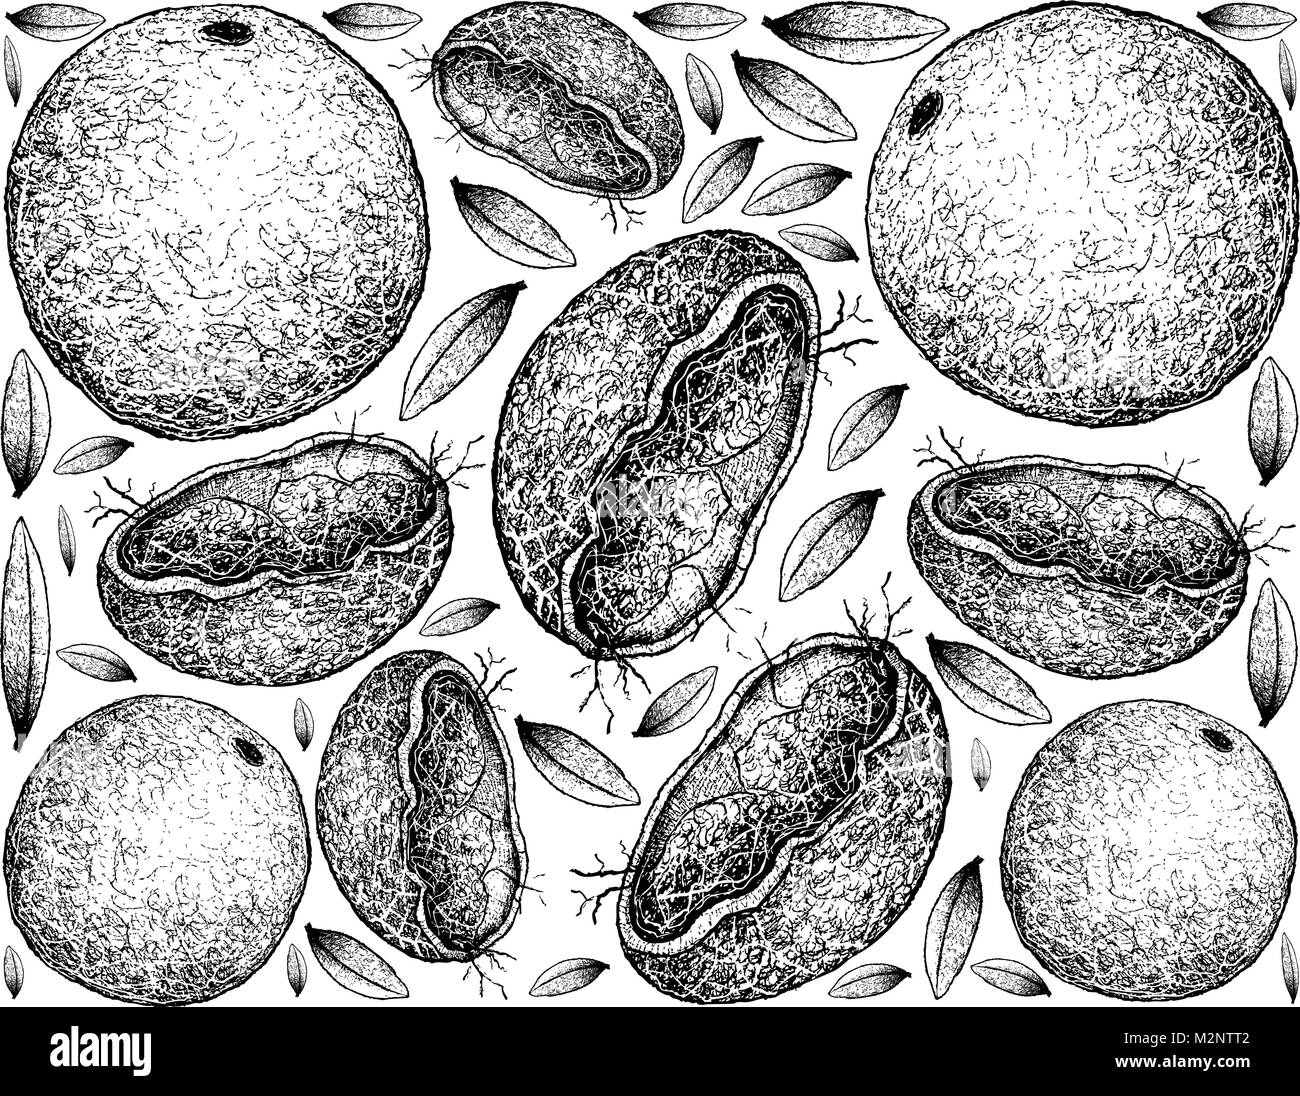 Tropical Fruits, Illustration Wallpaper Background of Hand Drawn Sketch Fresh Wood Apple or Limonia Acidissima Fruits. Stock Vector